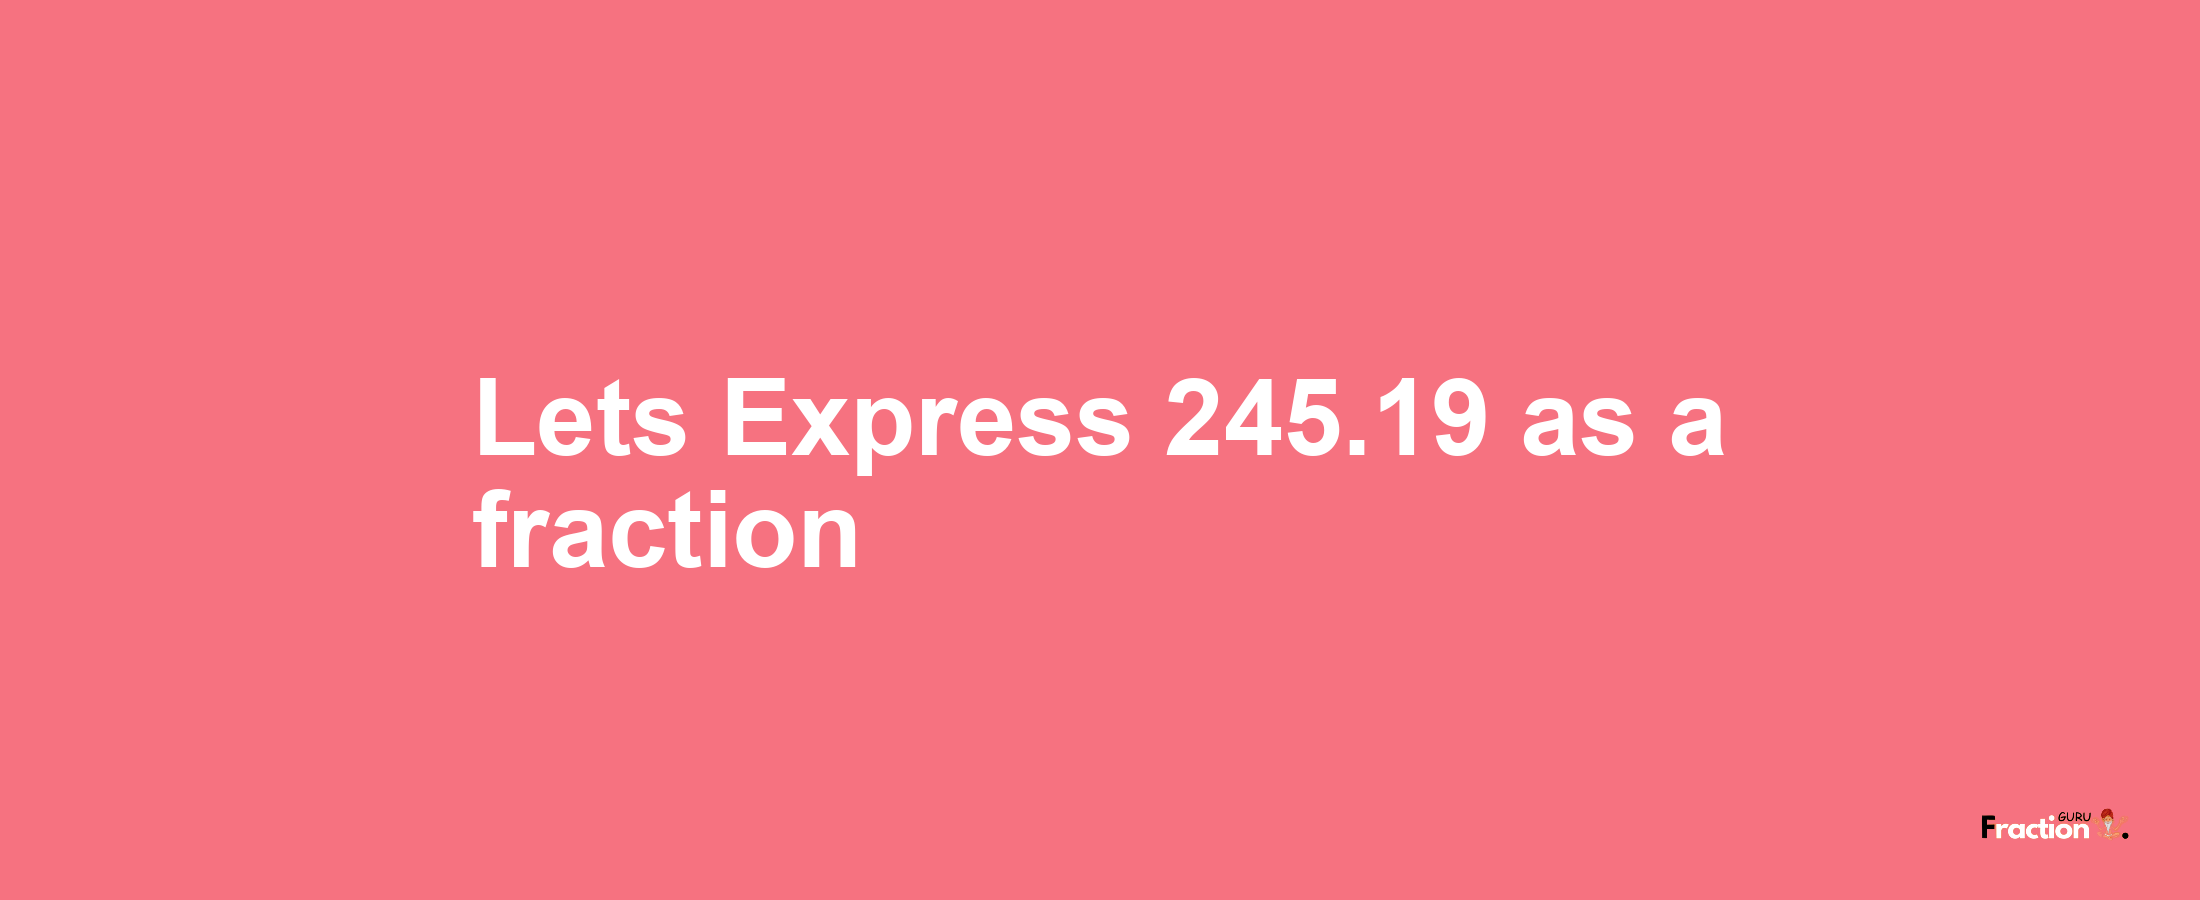 Lets Express 245.19 as afraction